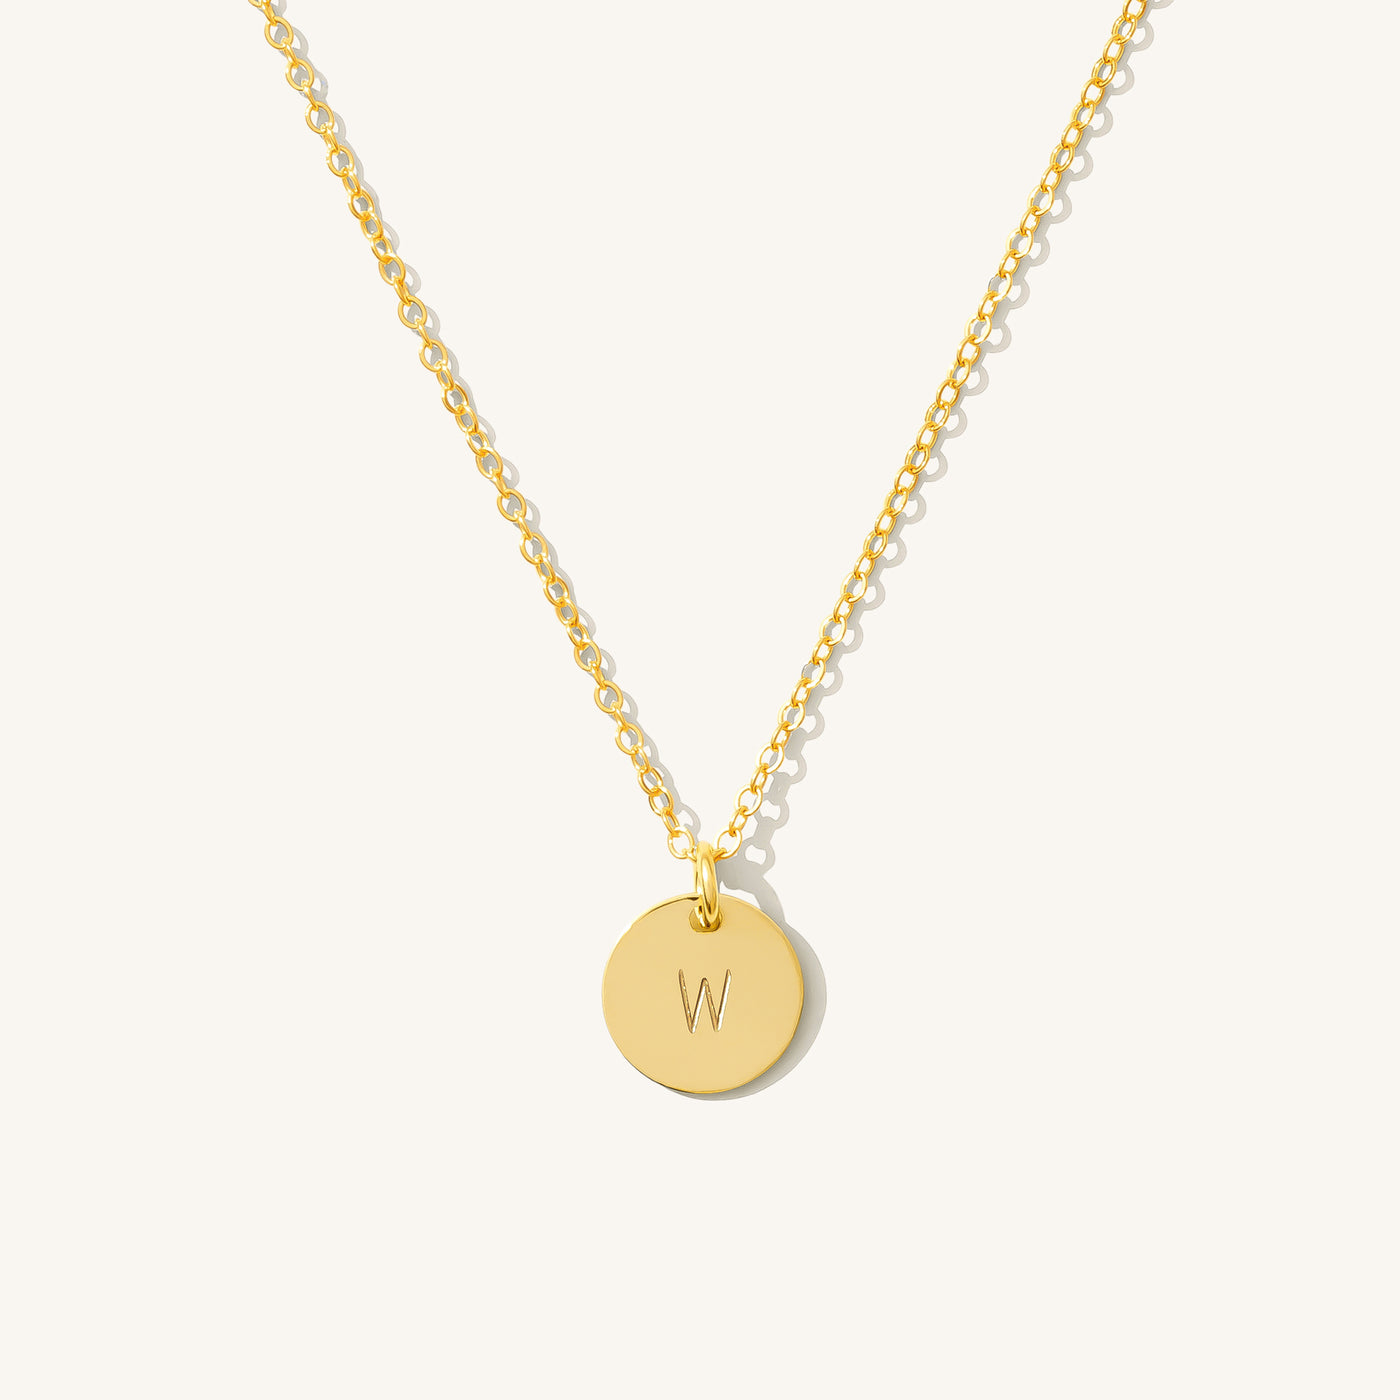 Dainty Gold Initial Necklace for Women Girls, 14K Gold Plated S925 Sterling  Silver Lowercase Letter Necklace Initial Necklaces for Teen Girls Kids  Little Girls Necklace Girls Jewelry Gifts - Walmart.com